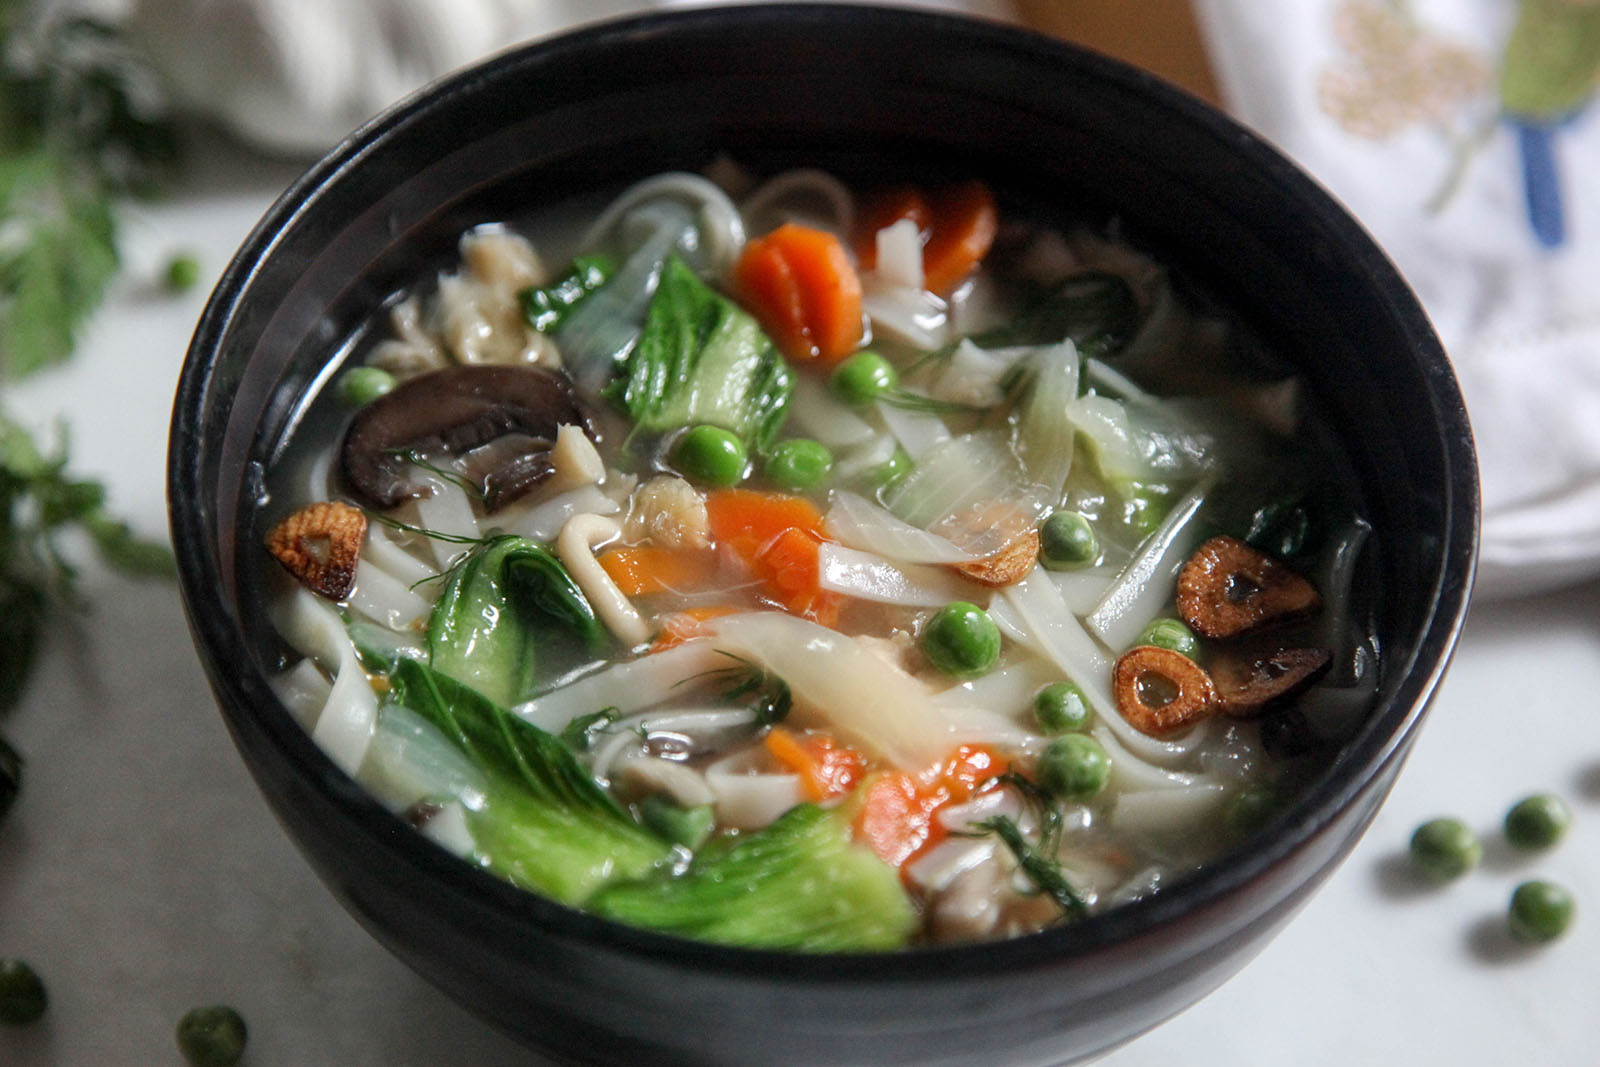 Easy Nutritious Chicken Vegetable Soup with Noodles in Bone Broth. Have it to treat covid-19 at home.